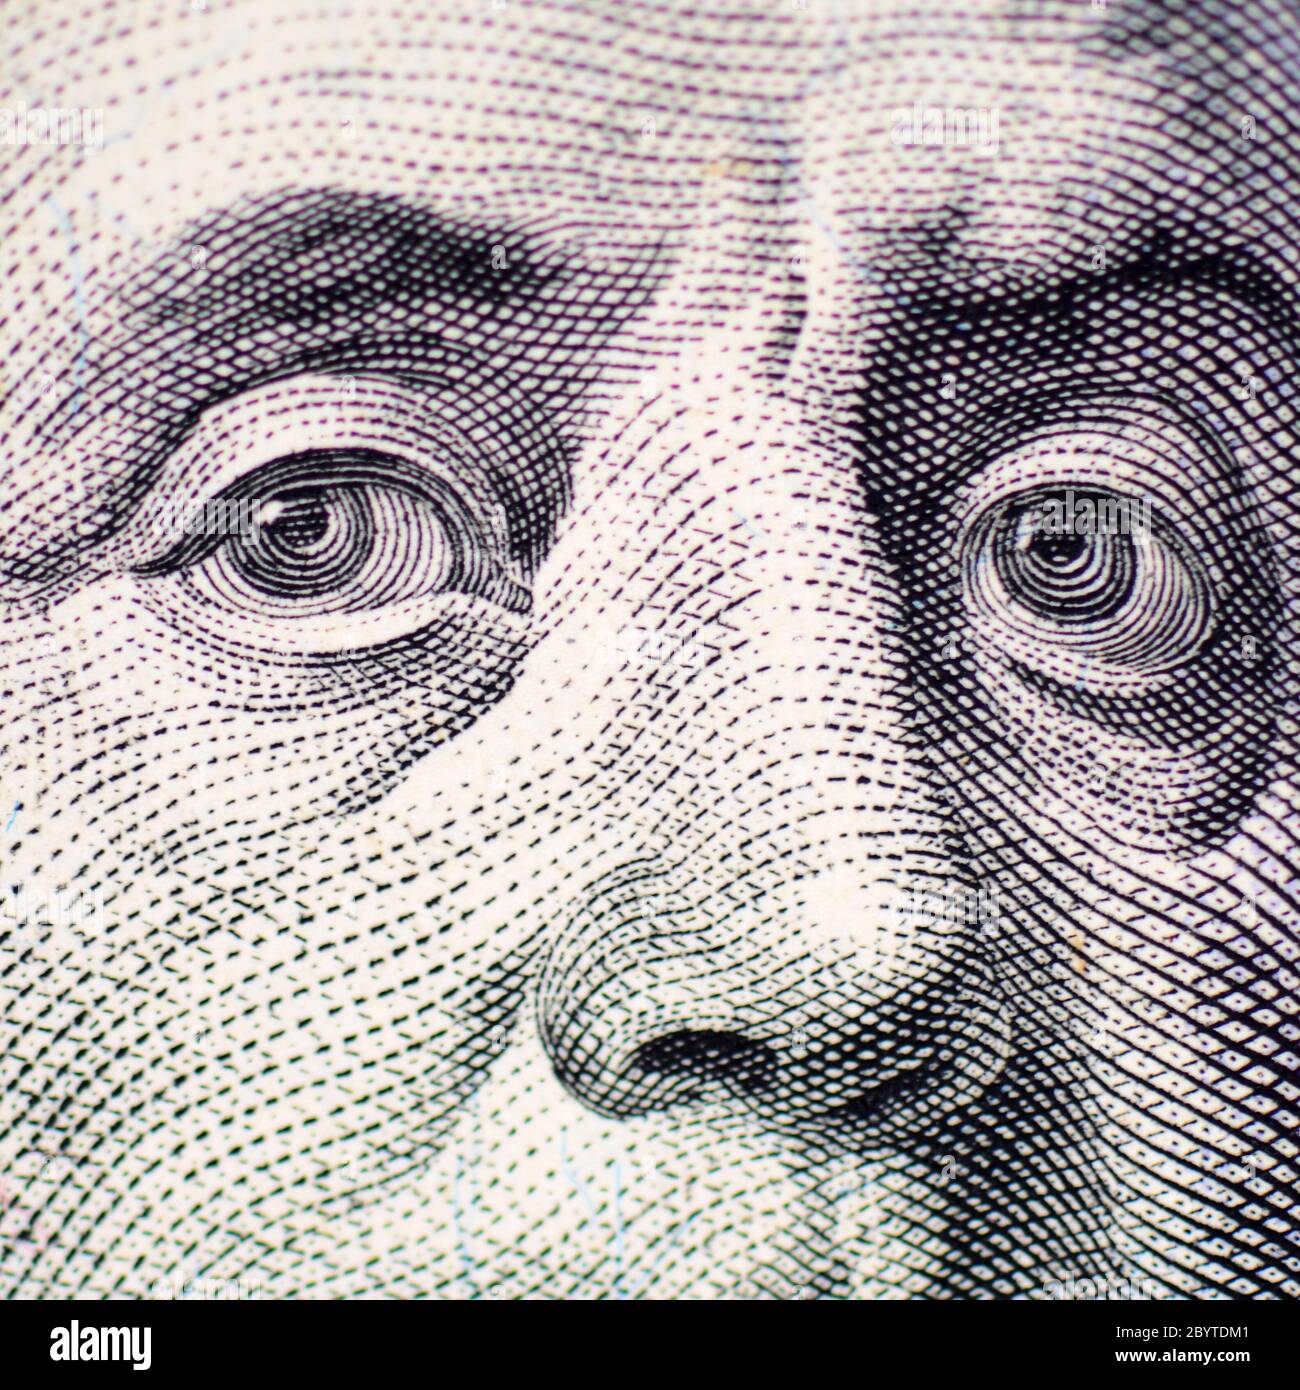 The face of Franklin the dollar bill macro Stock Photo